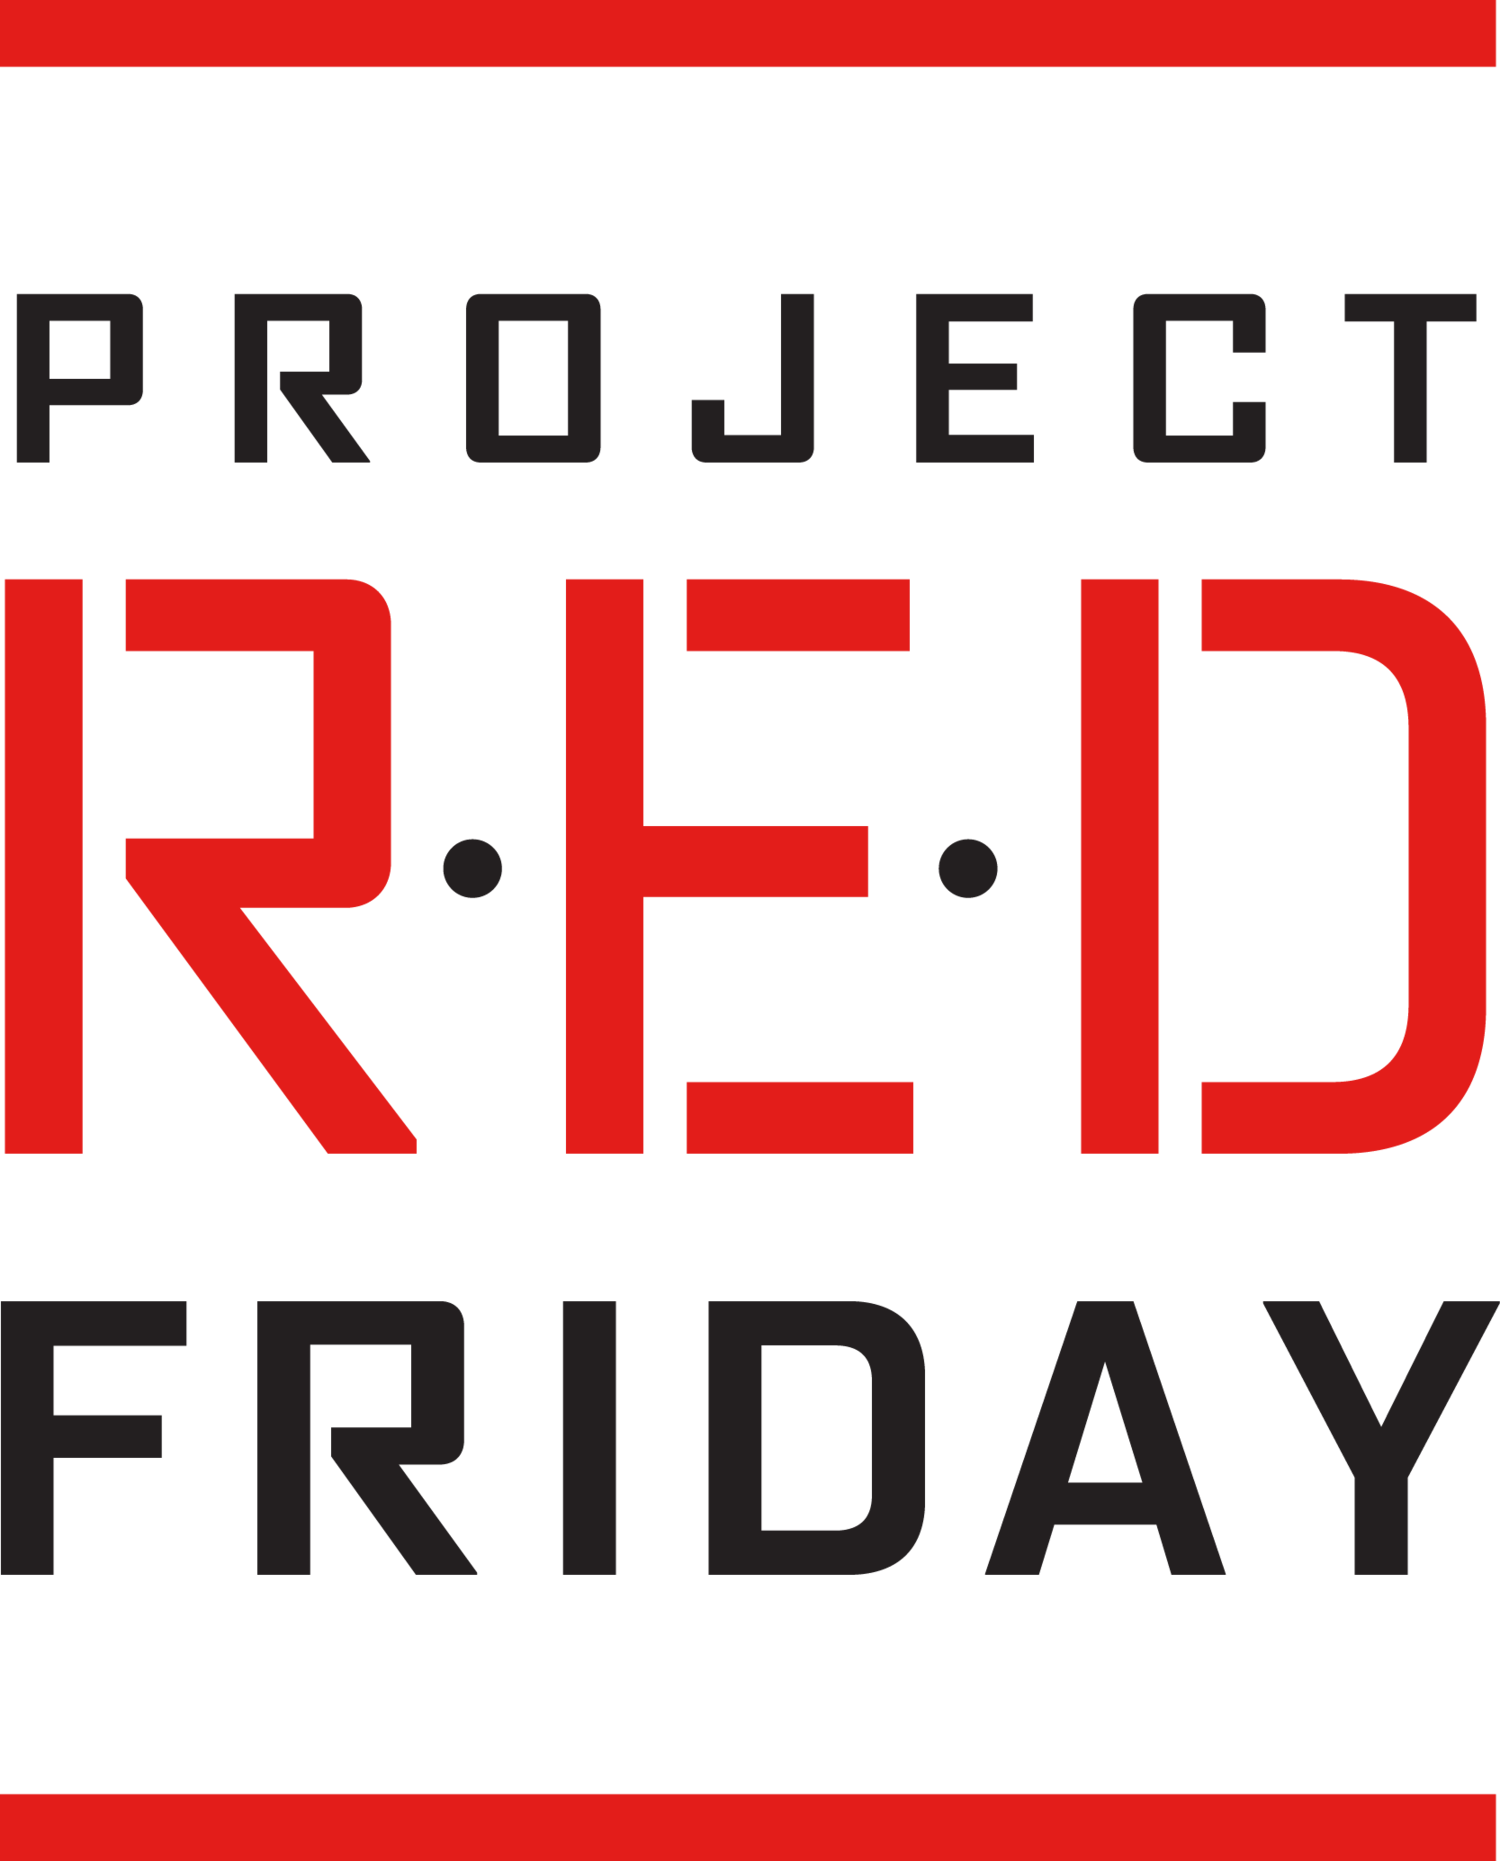 Project RED Friday